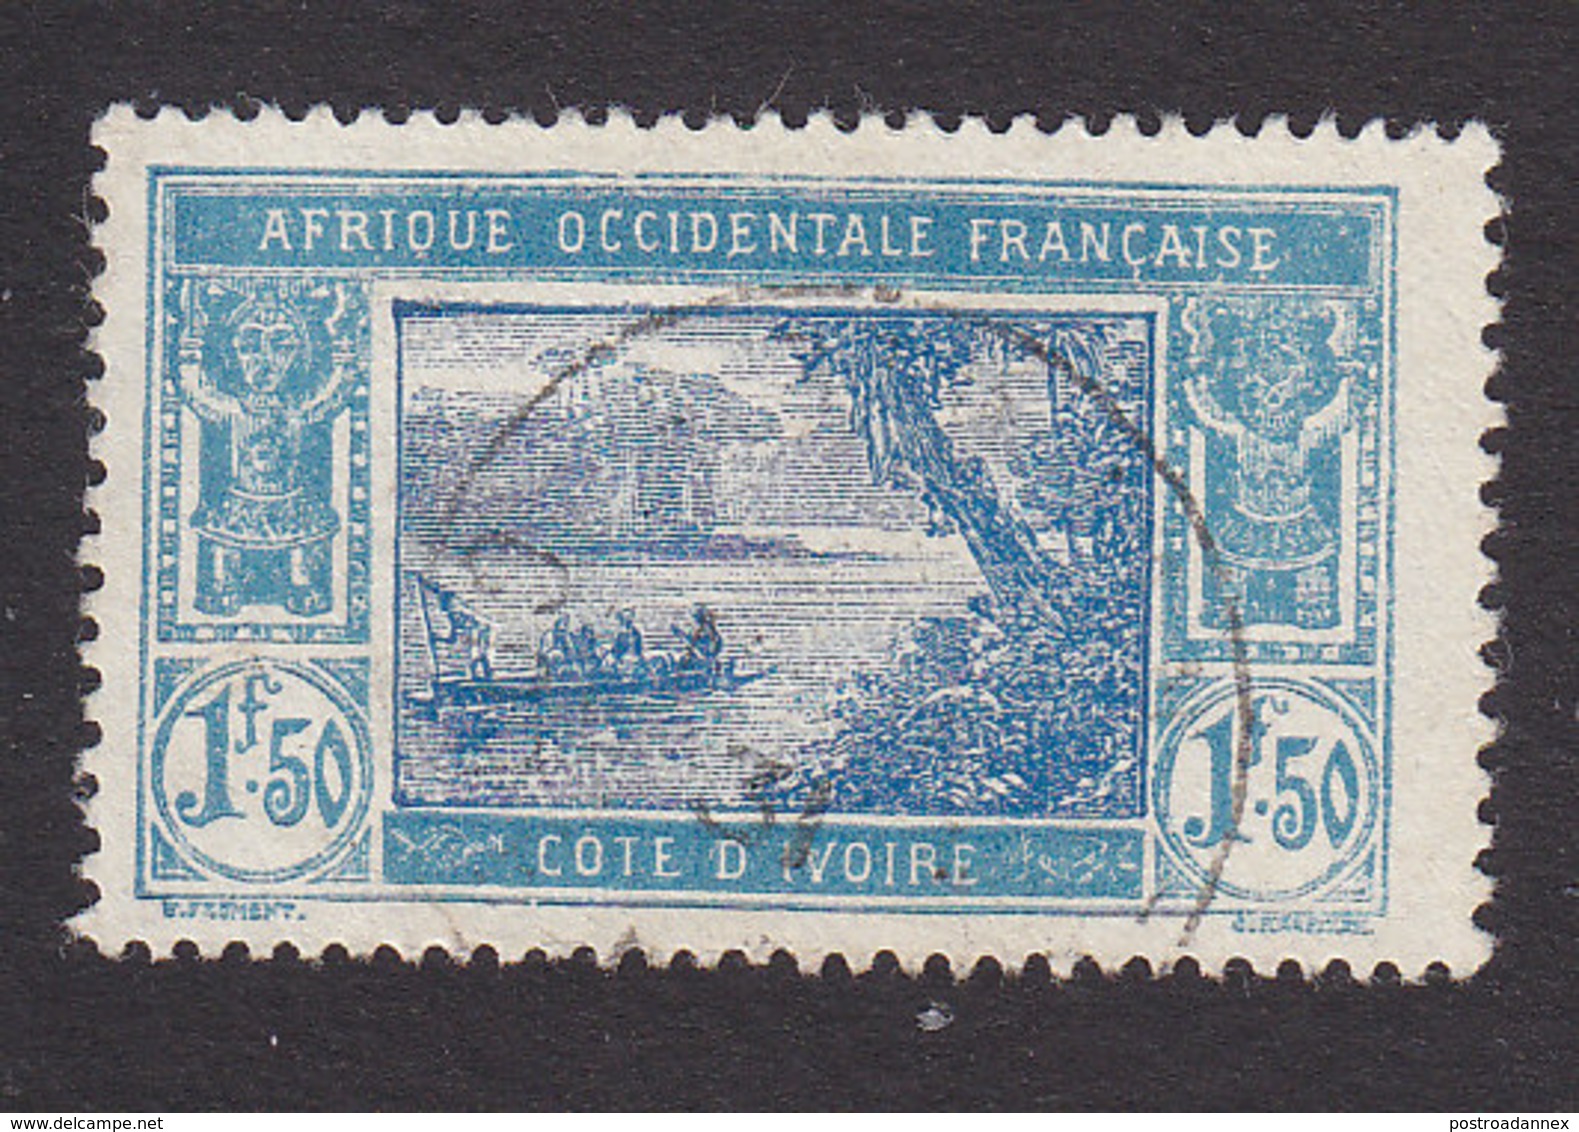 Ivory Coast, Scott #73, Used, River Scene, Issued 1913 - Oblitérés